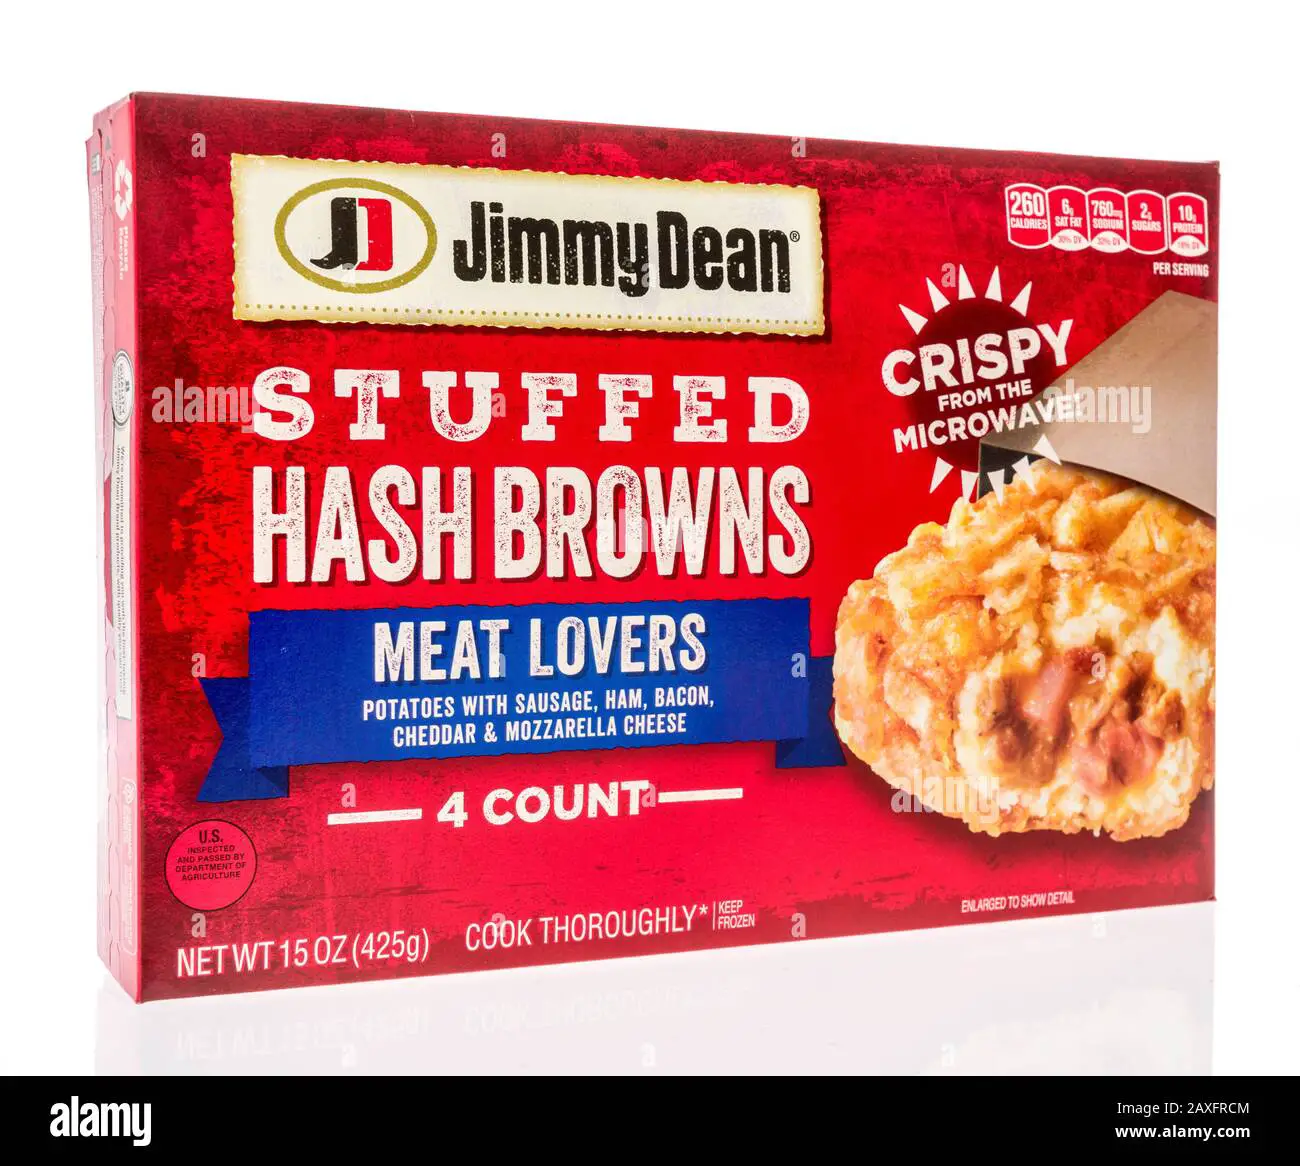 Hash Browns High Resolution Stock Photography and Images